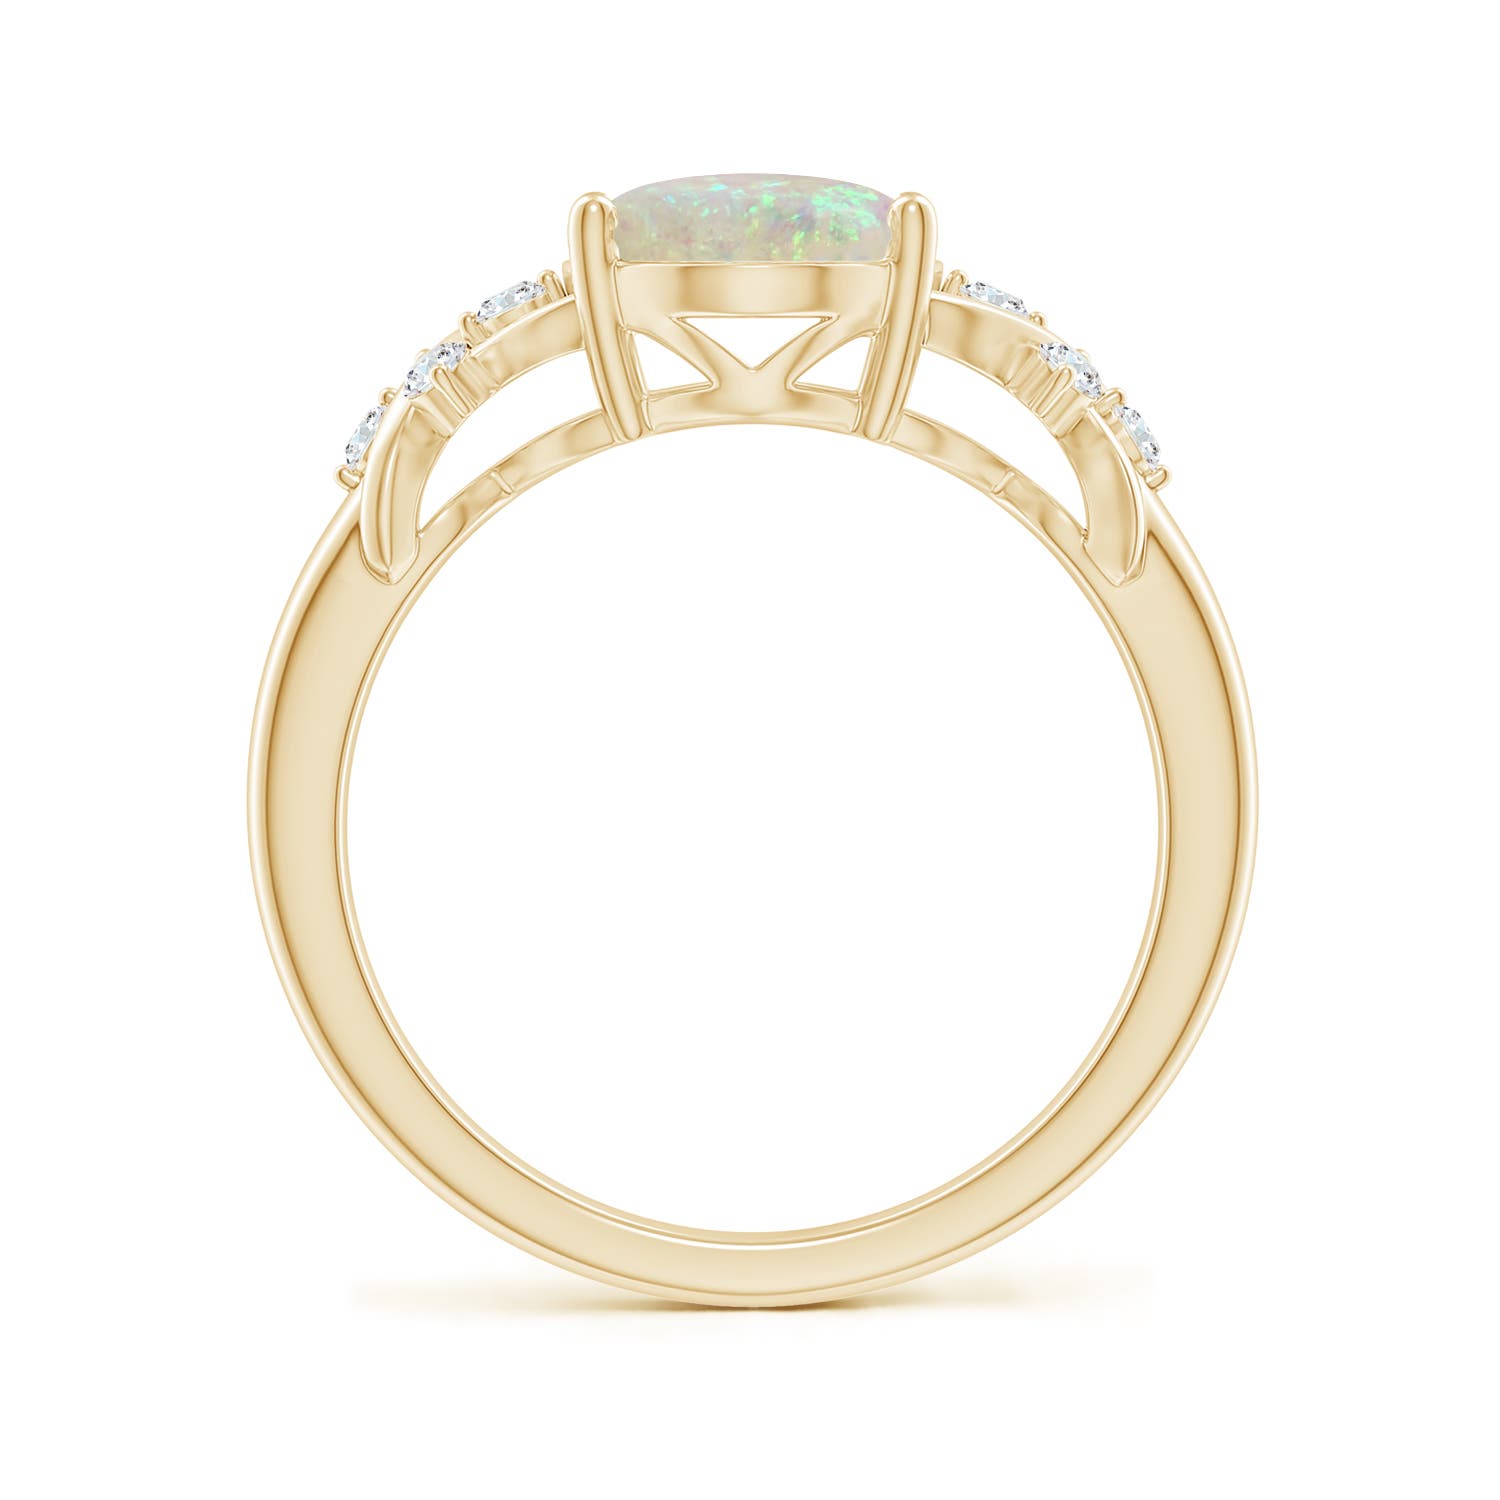 AAA - Opal / 1.62 CT / 14 KT Yellow Gold